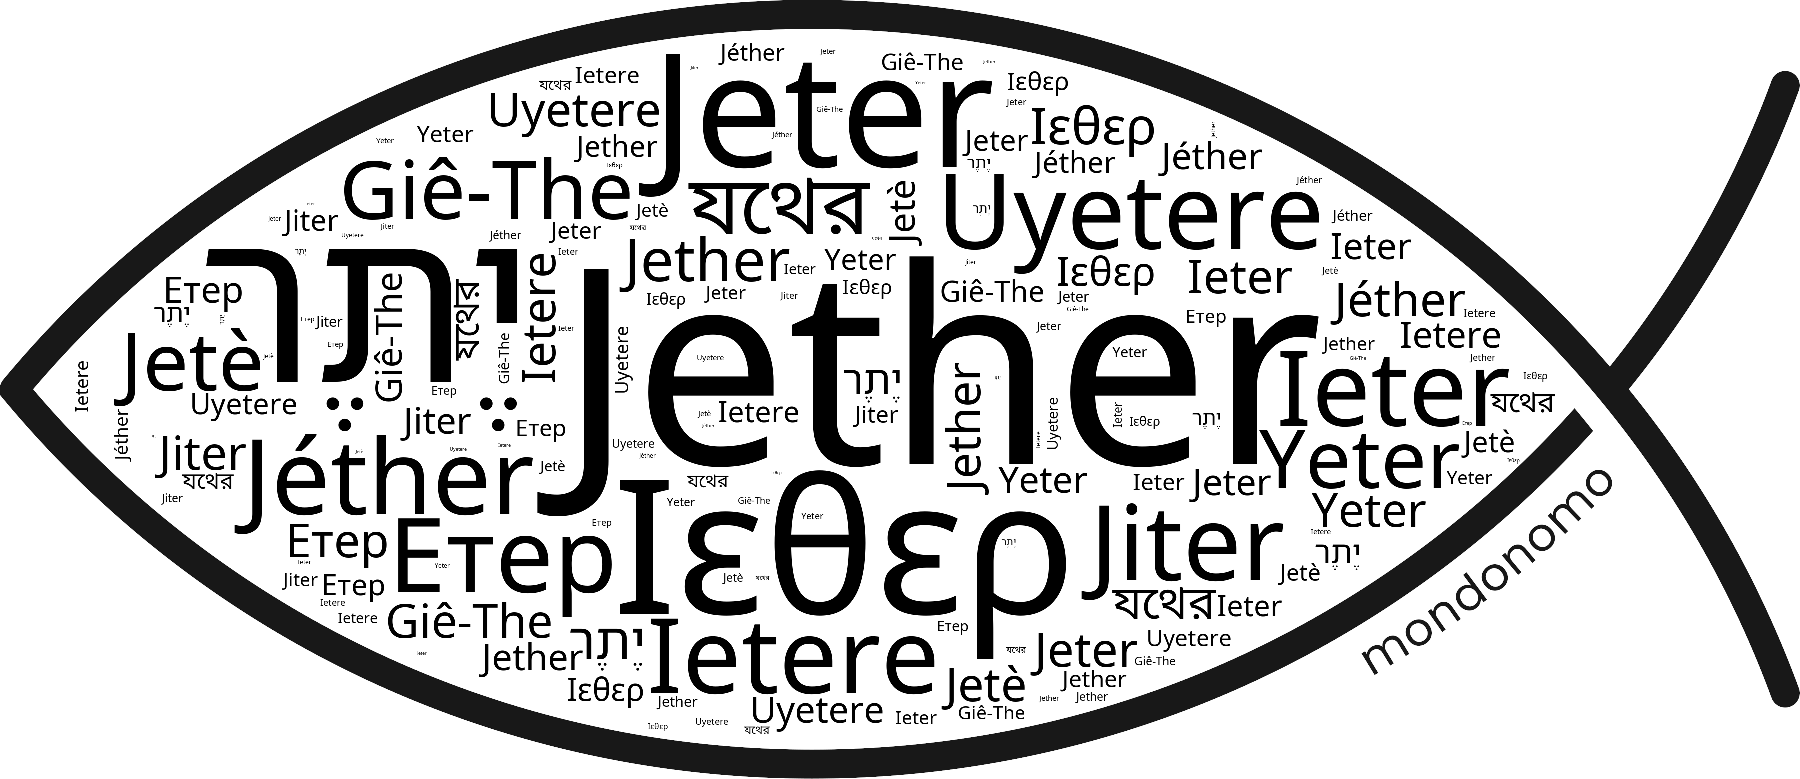 Name Jether in the world's Bibles